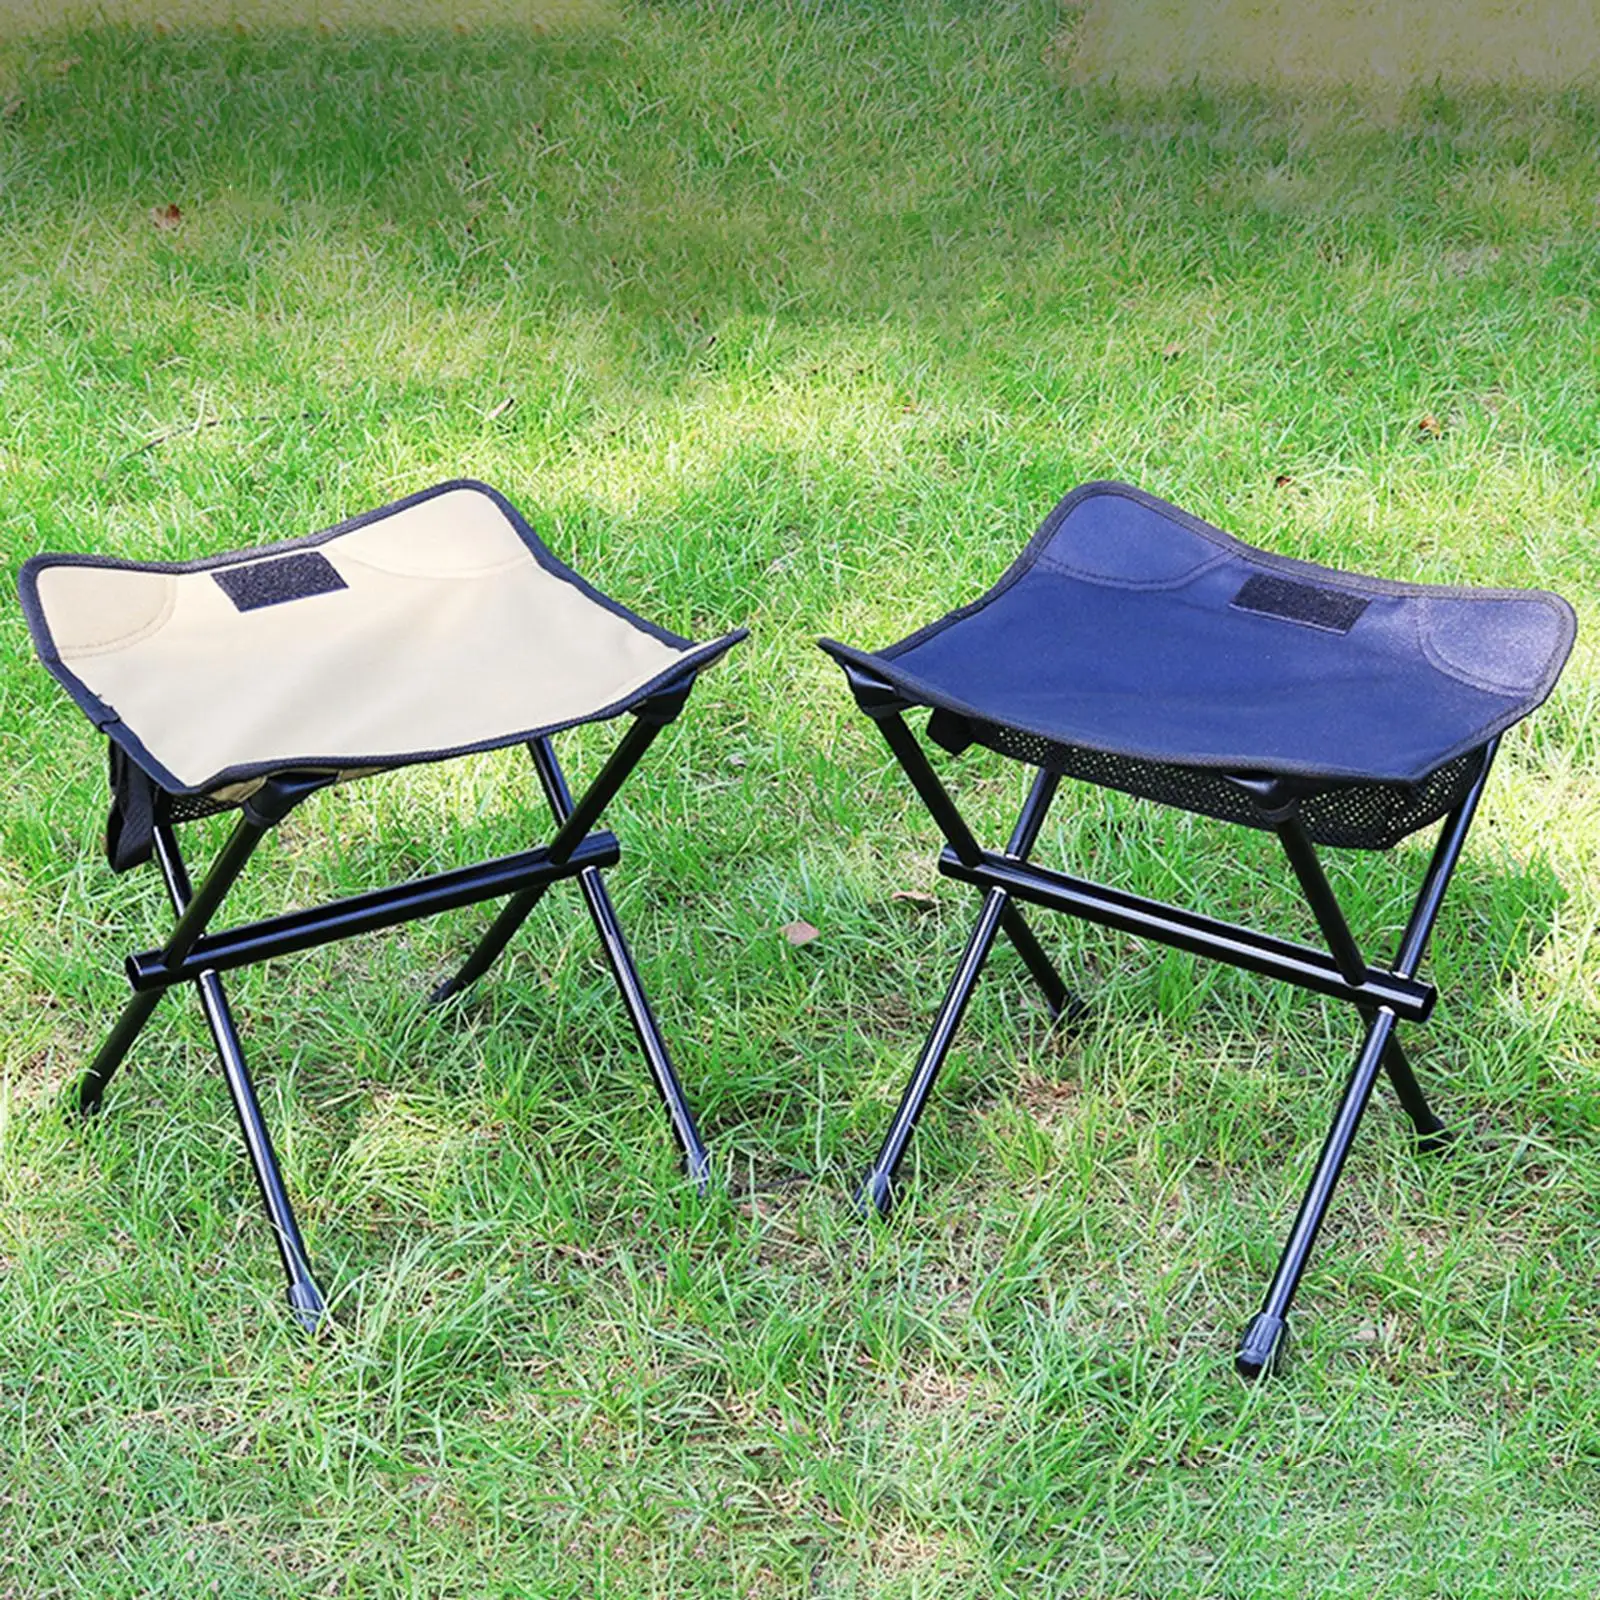 Outdoor Folding Chair Foldable Camping Stool Collapsible Stool Hiking Fishing - £20.05 GBP